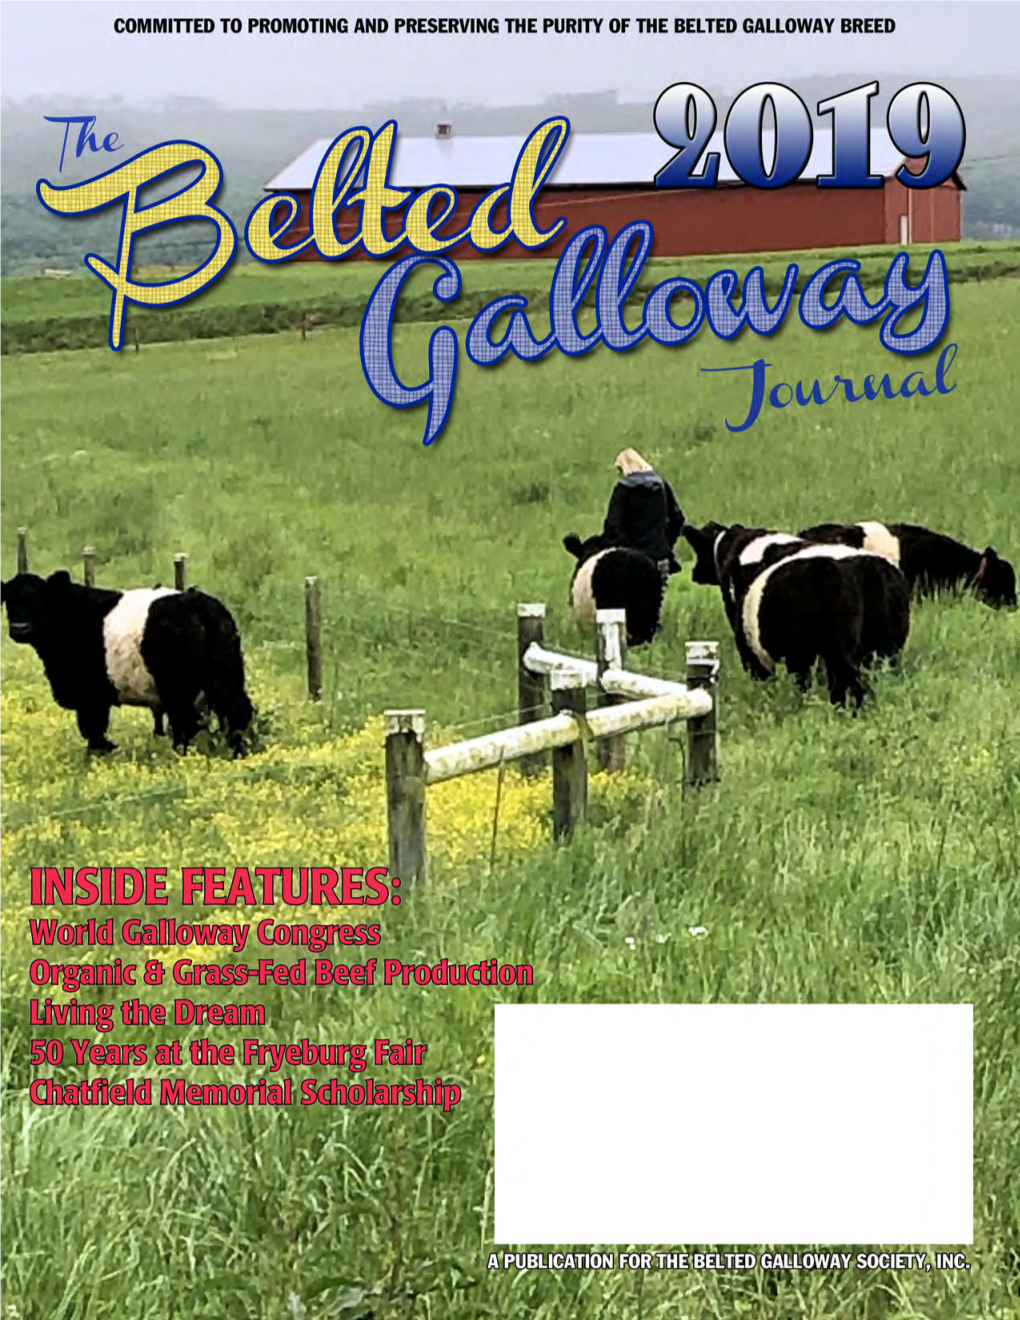 1 the Belted Galloway Journal 2019 the Belted Galloway Journal 2019 2 2019 Council and Officers Cover Photo Credits: Arston & Jennifer F